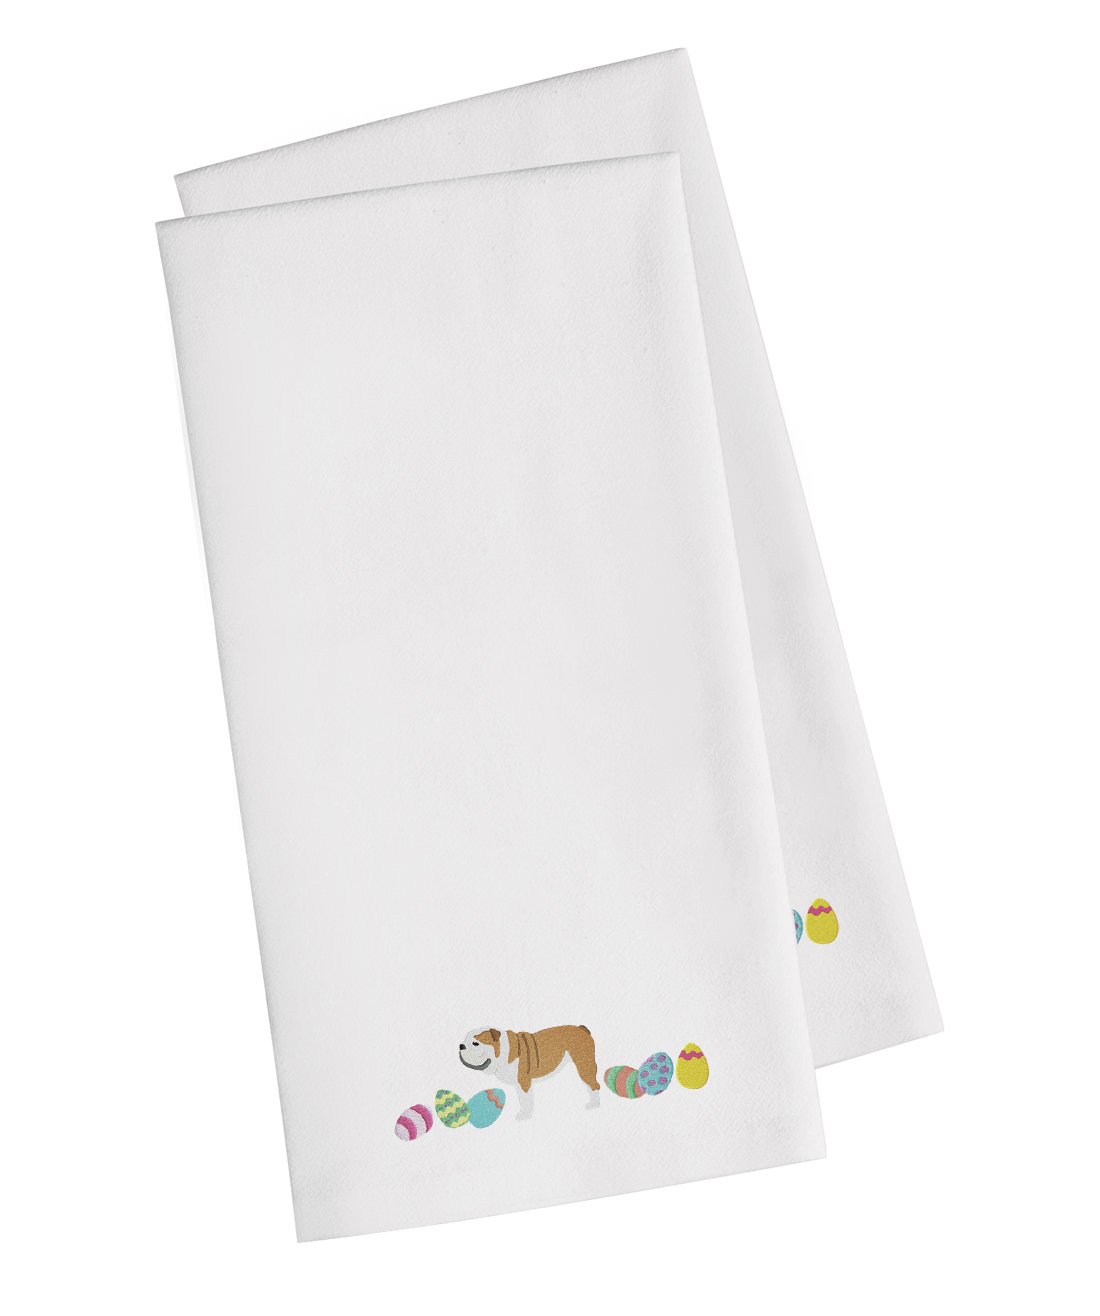 English Bulldog Easter White Embroidered Kitchen Towel Set of 2 CK1636WHTWE by Caroline's Treasures